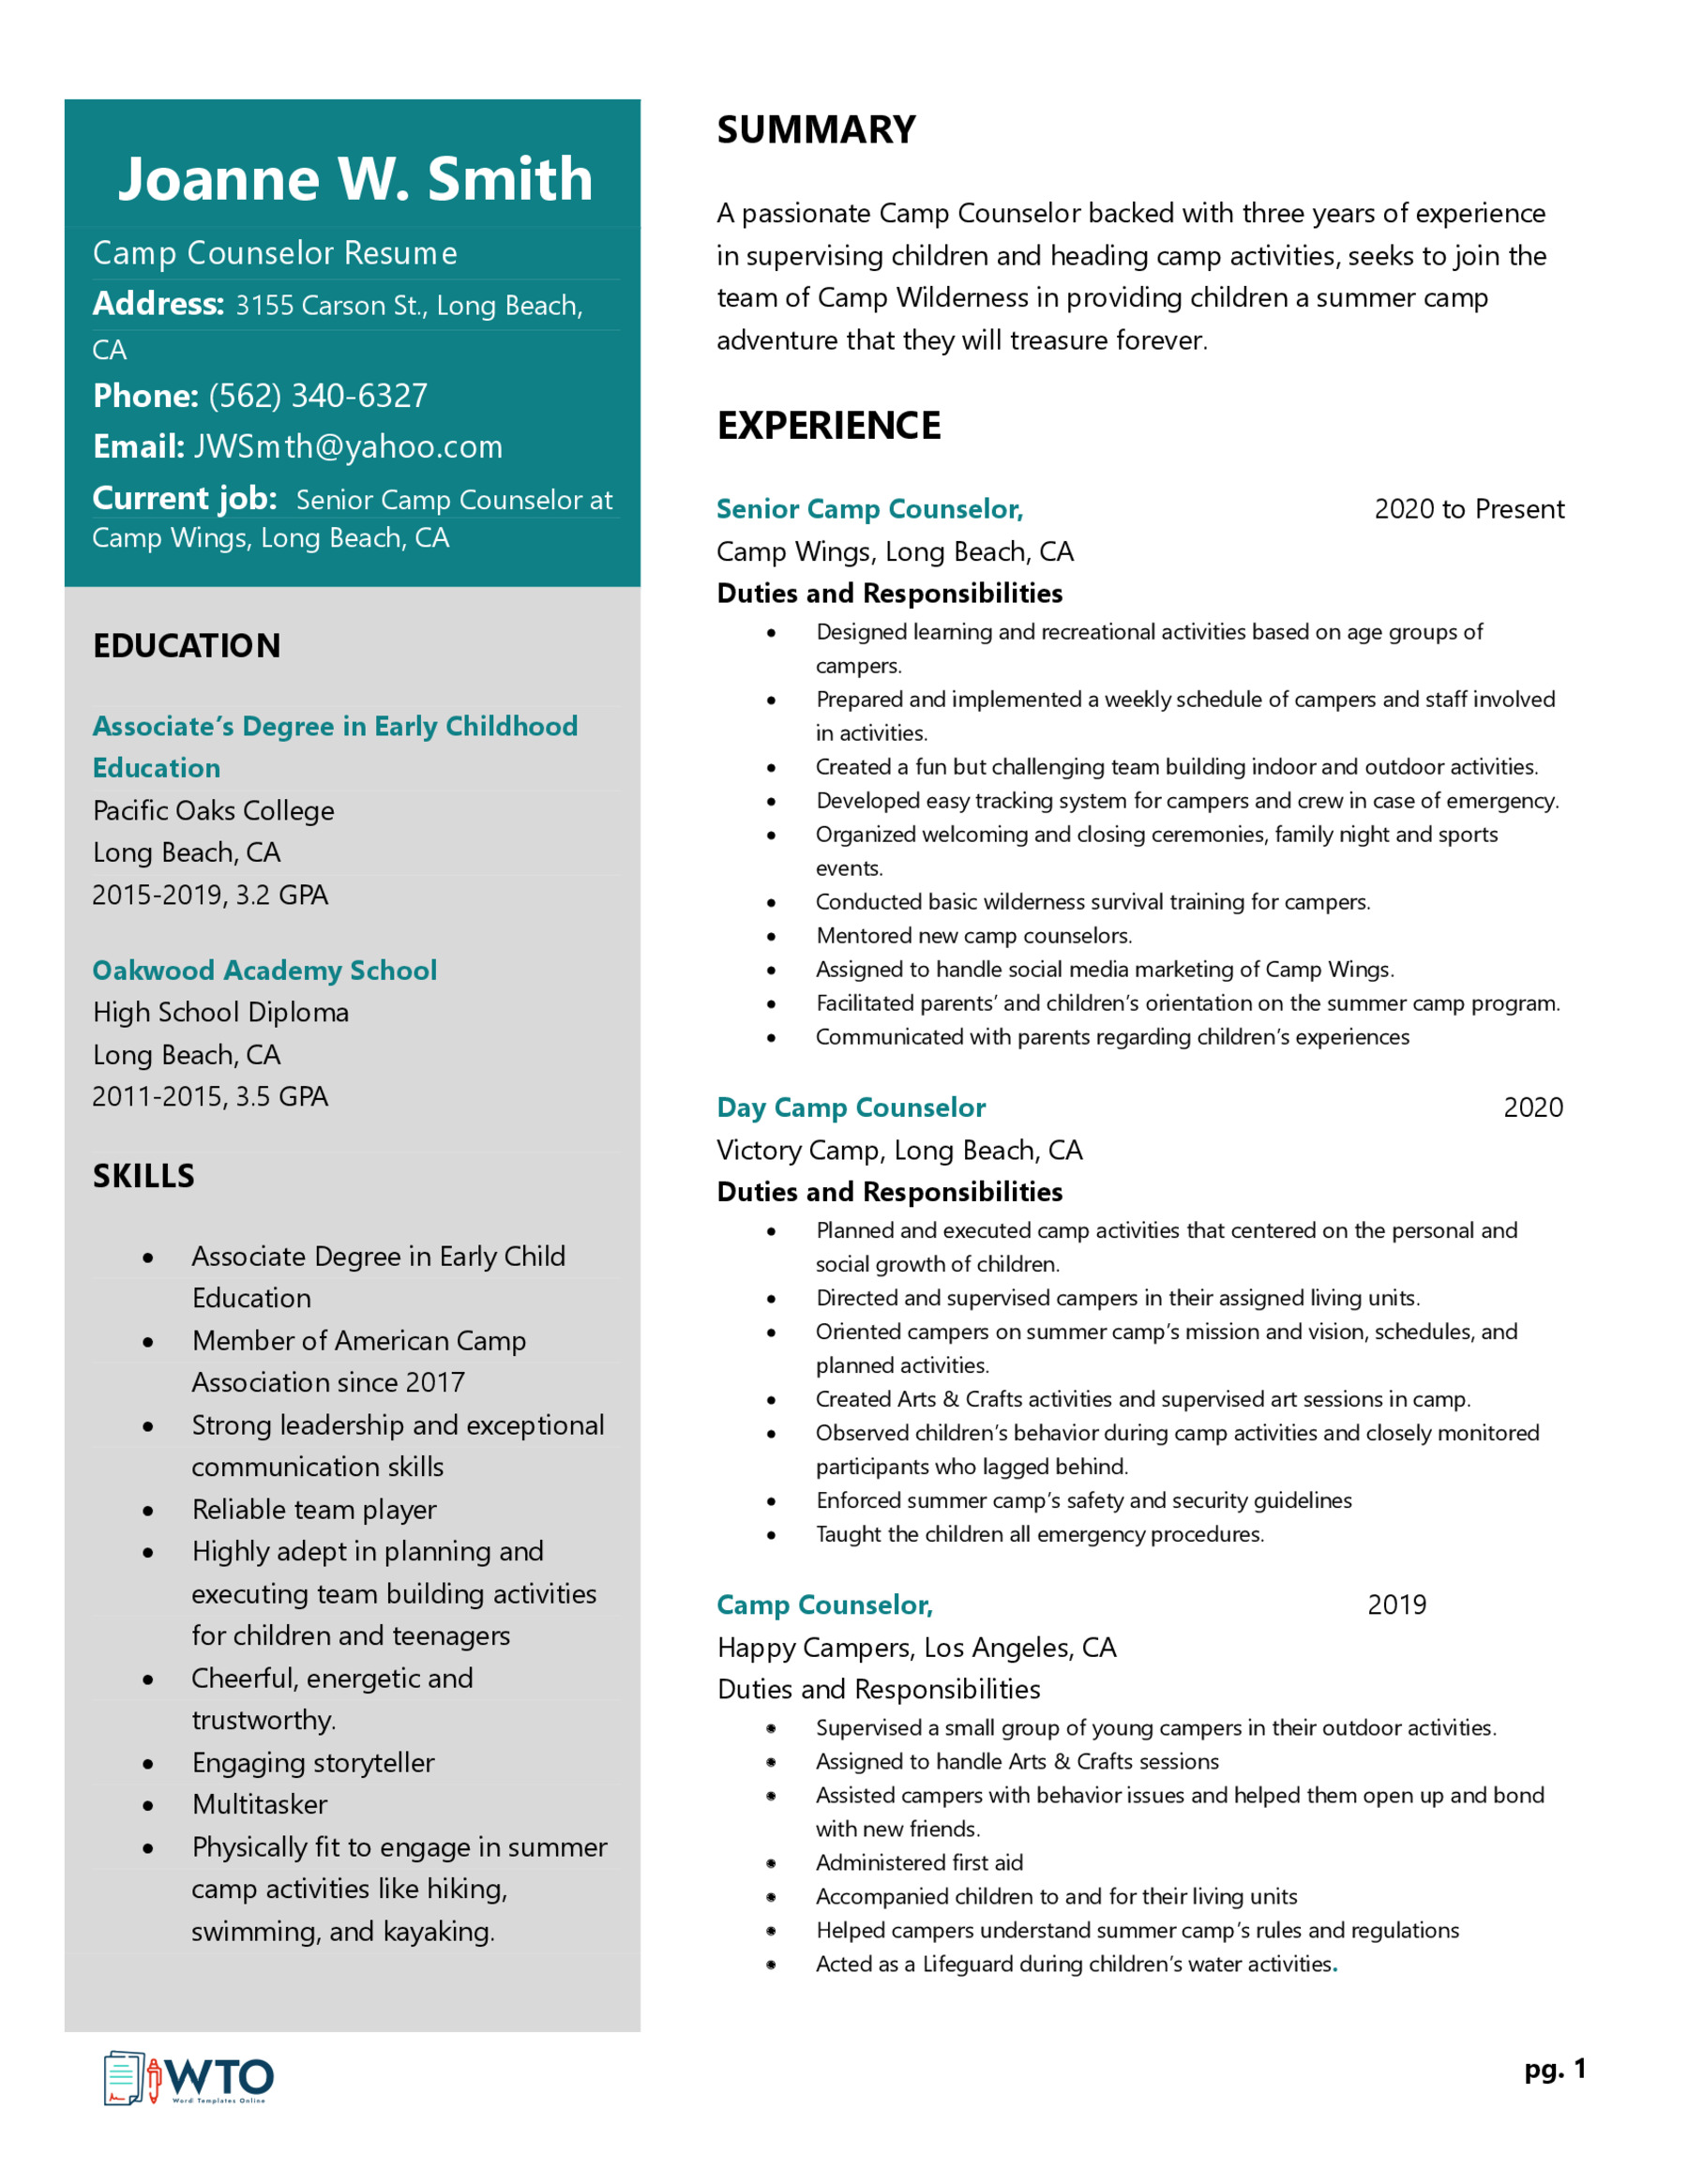 Camp Counselor Resume Template - Ready-to-Use Word Document